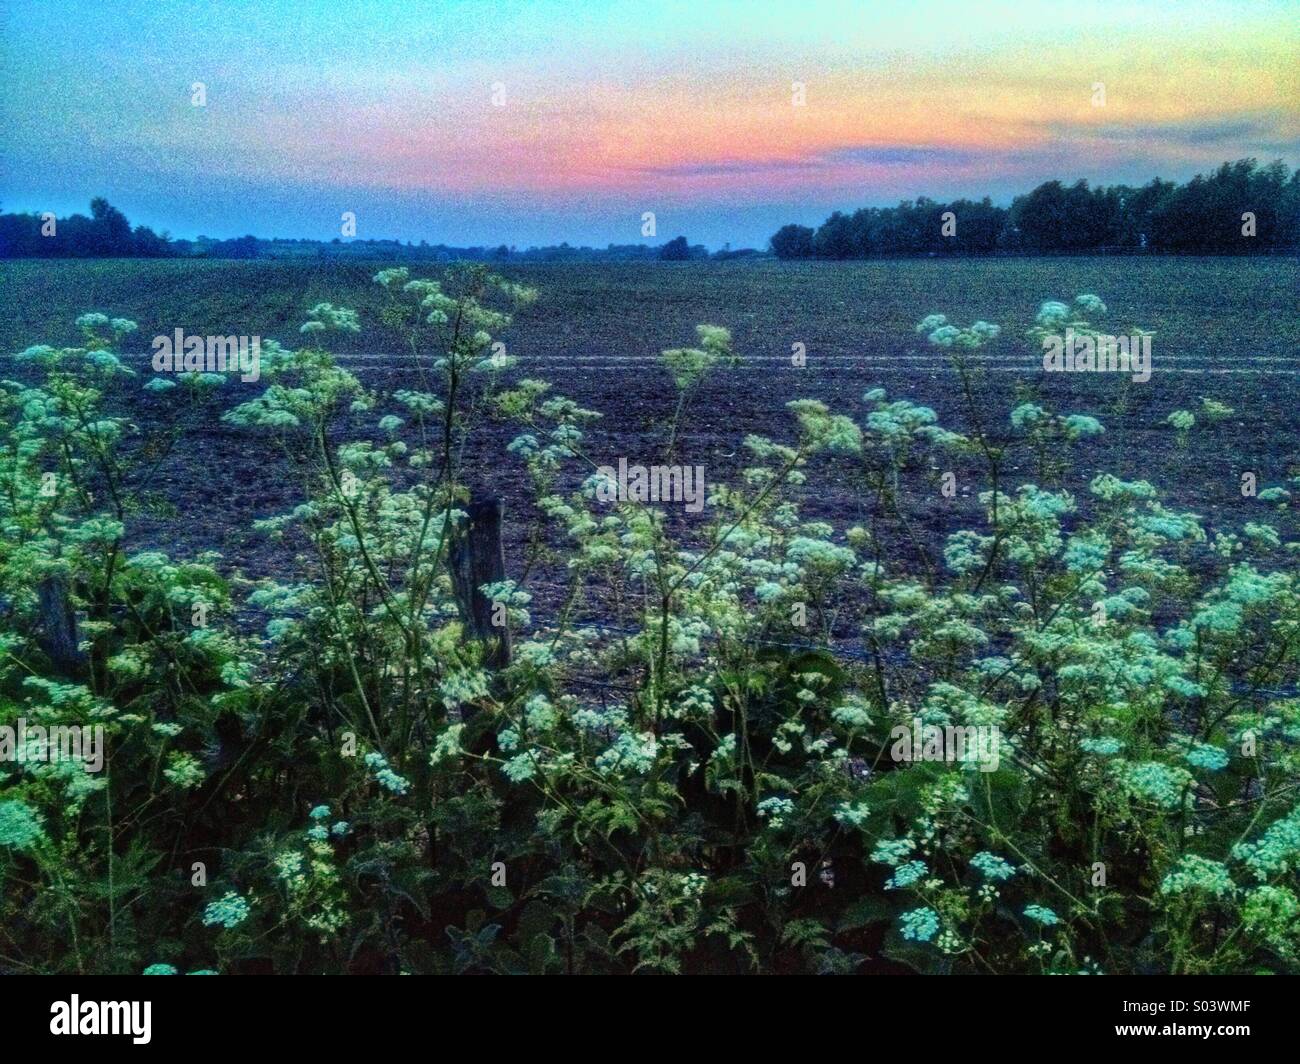 Early summer evening, rural scene at sunset Stock Photo